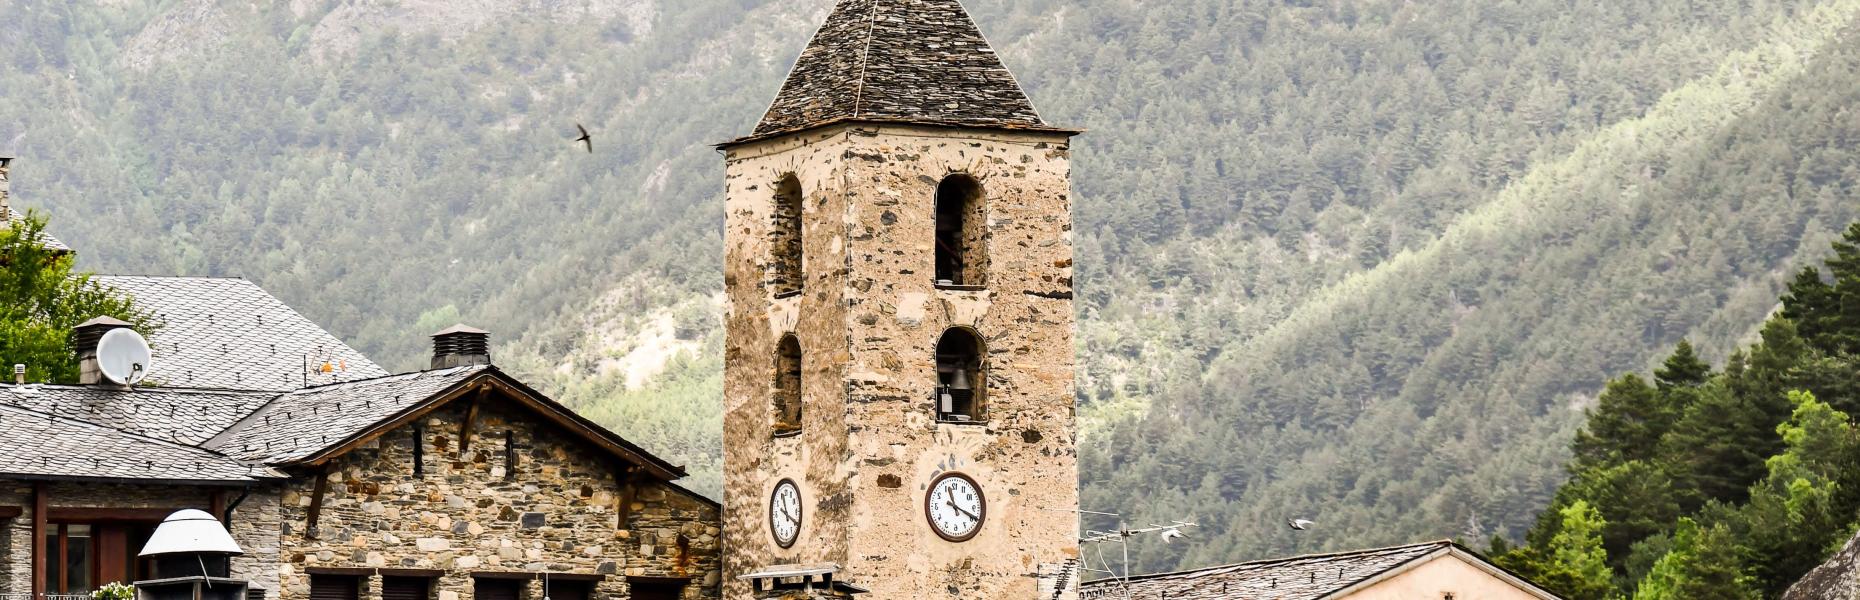 Discovering the architecture and history of Andorra